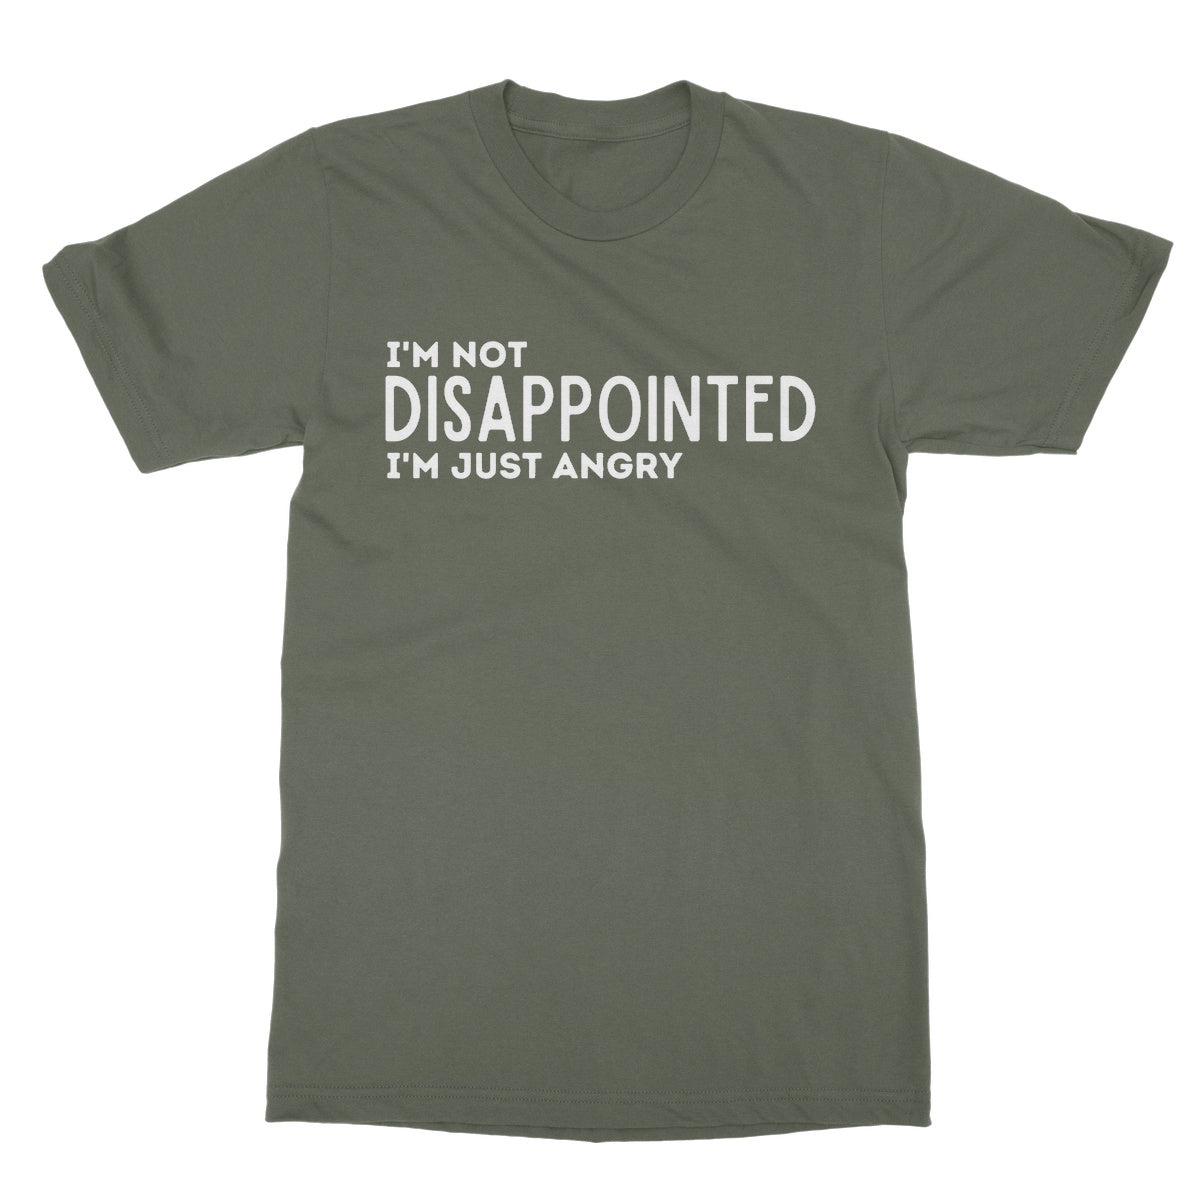 I'm not disappointed I'm just angry t shirt green